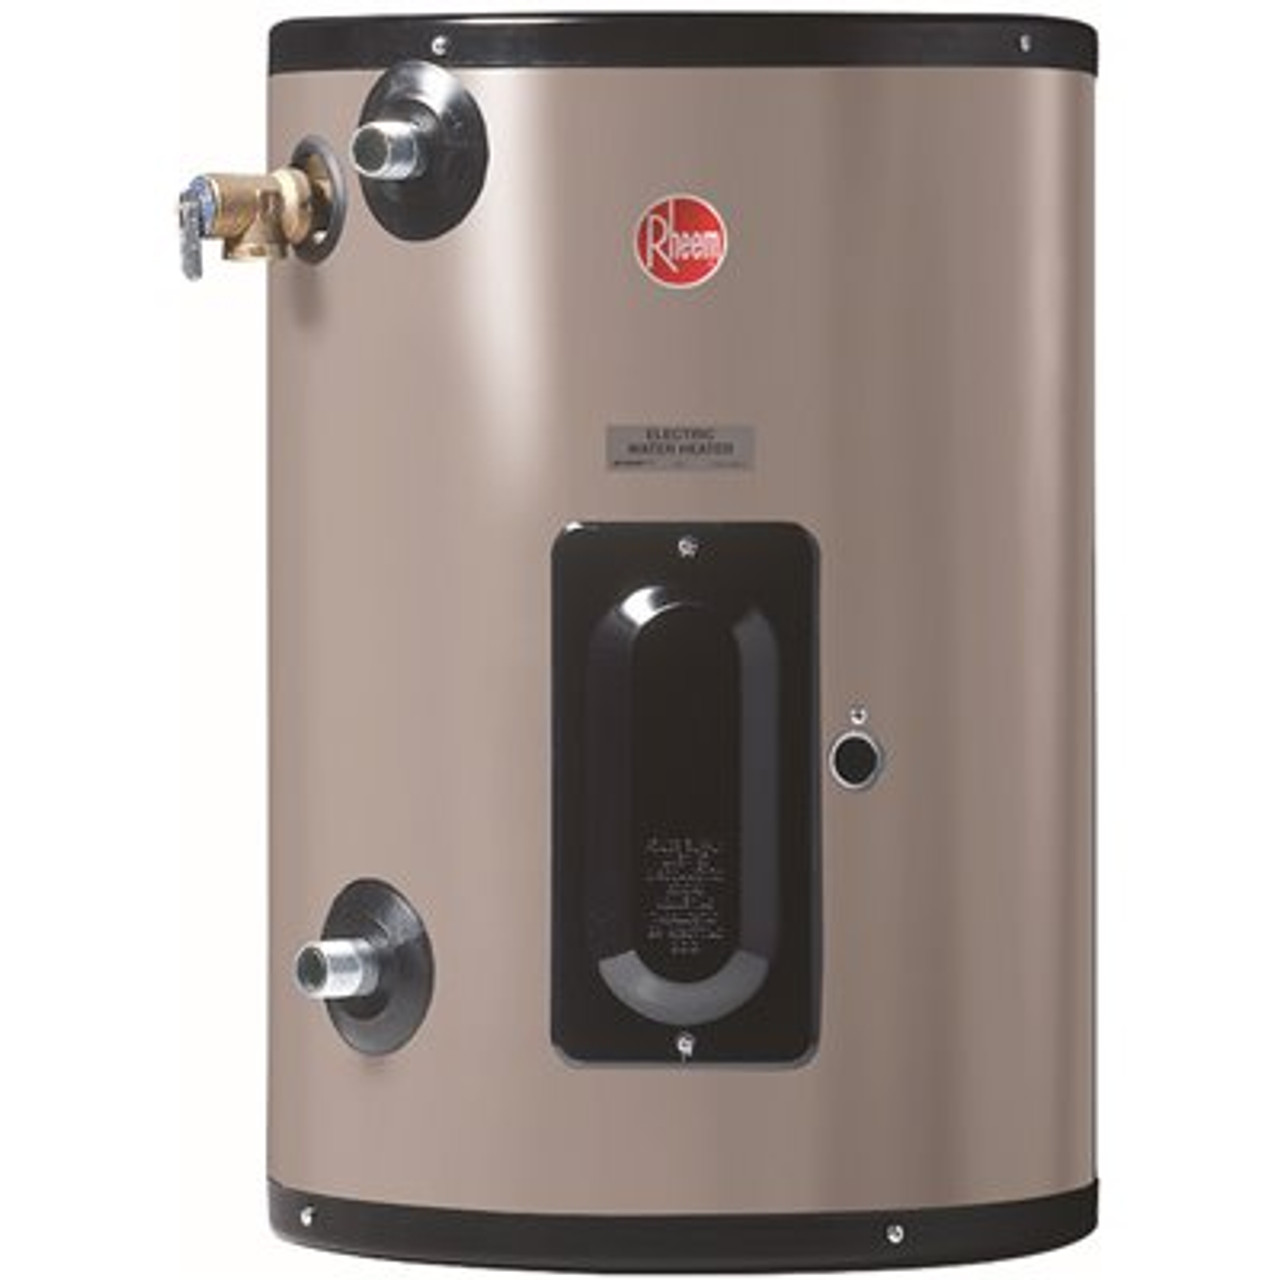 Rheem Commercial Point of Use 20 Gal. 480-Volt 6kw 1 Phase Electric Tank Water Heater